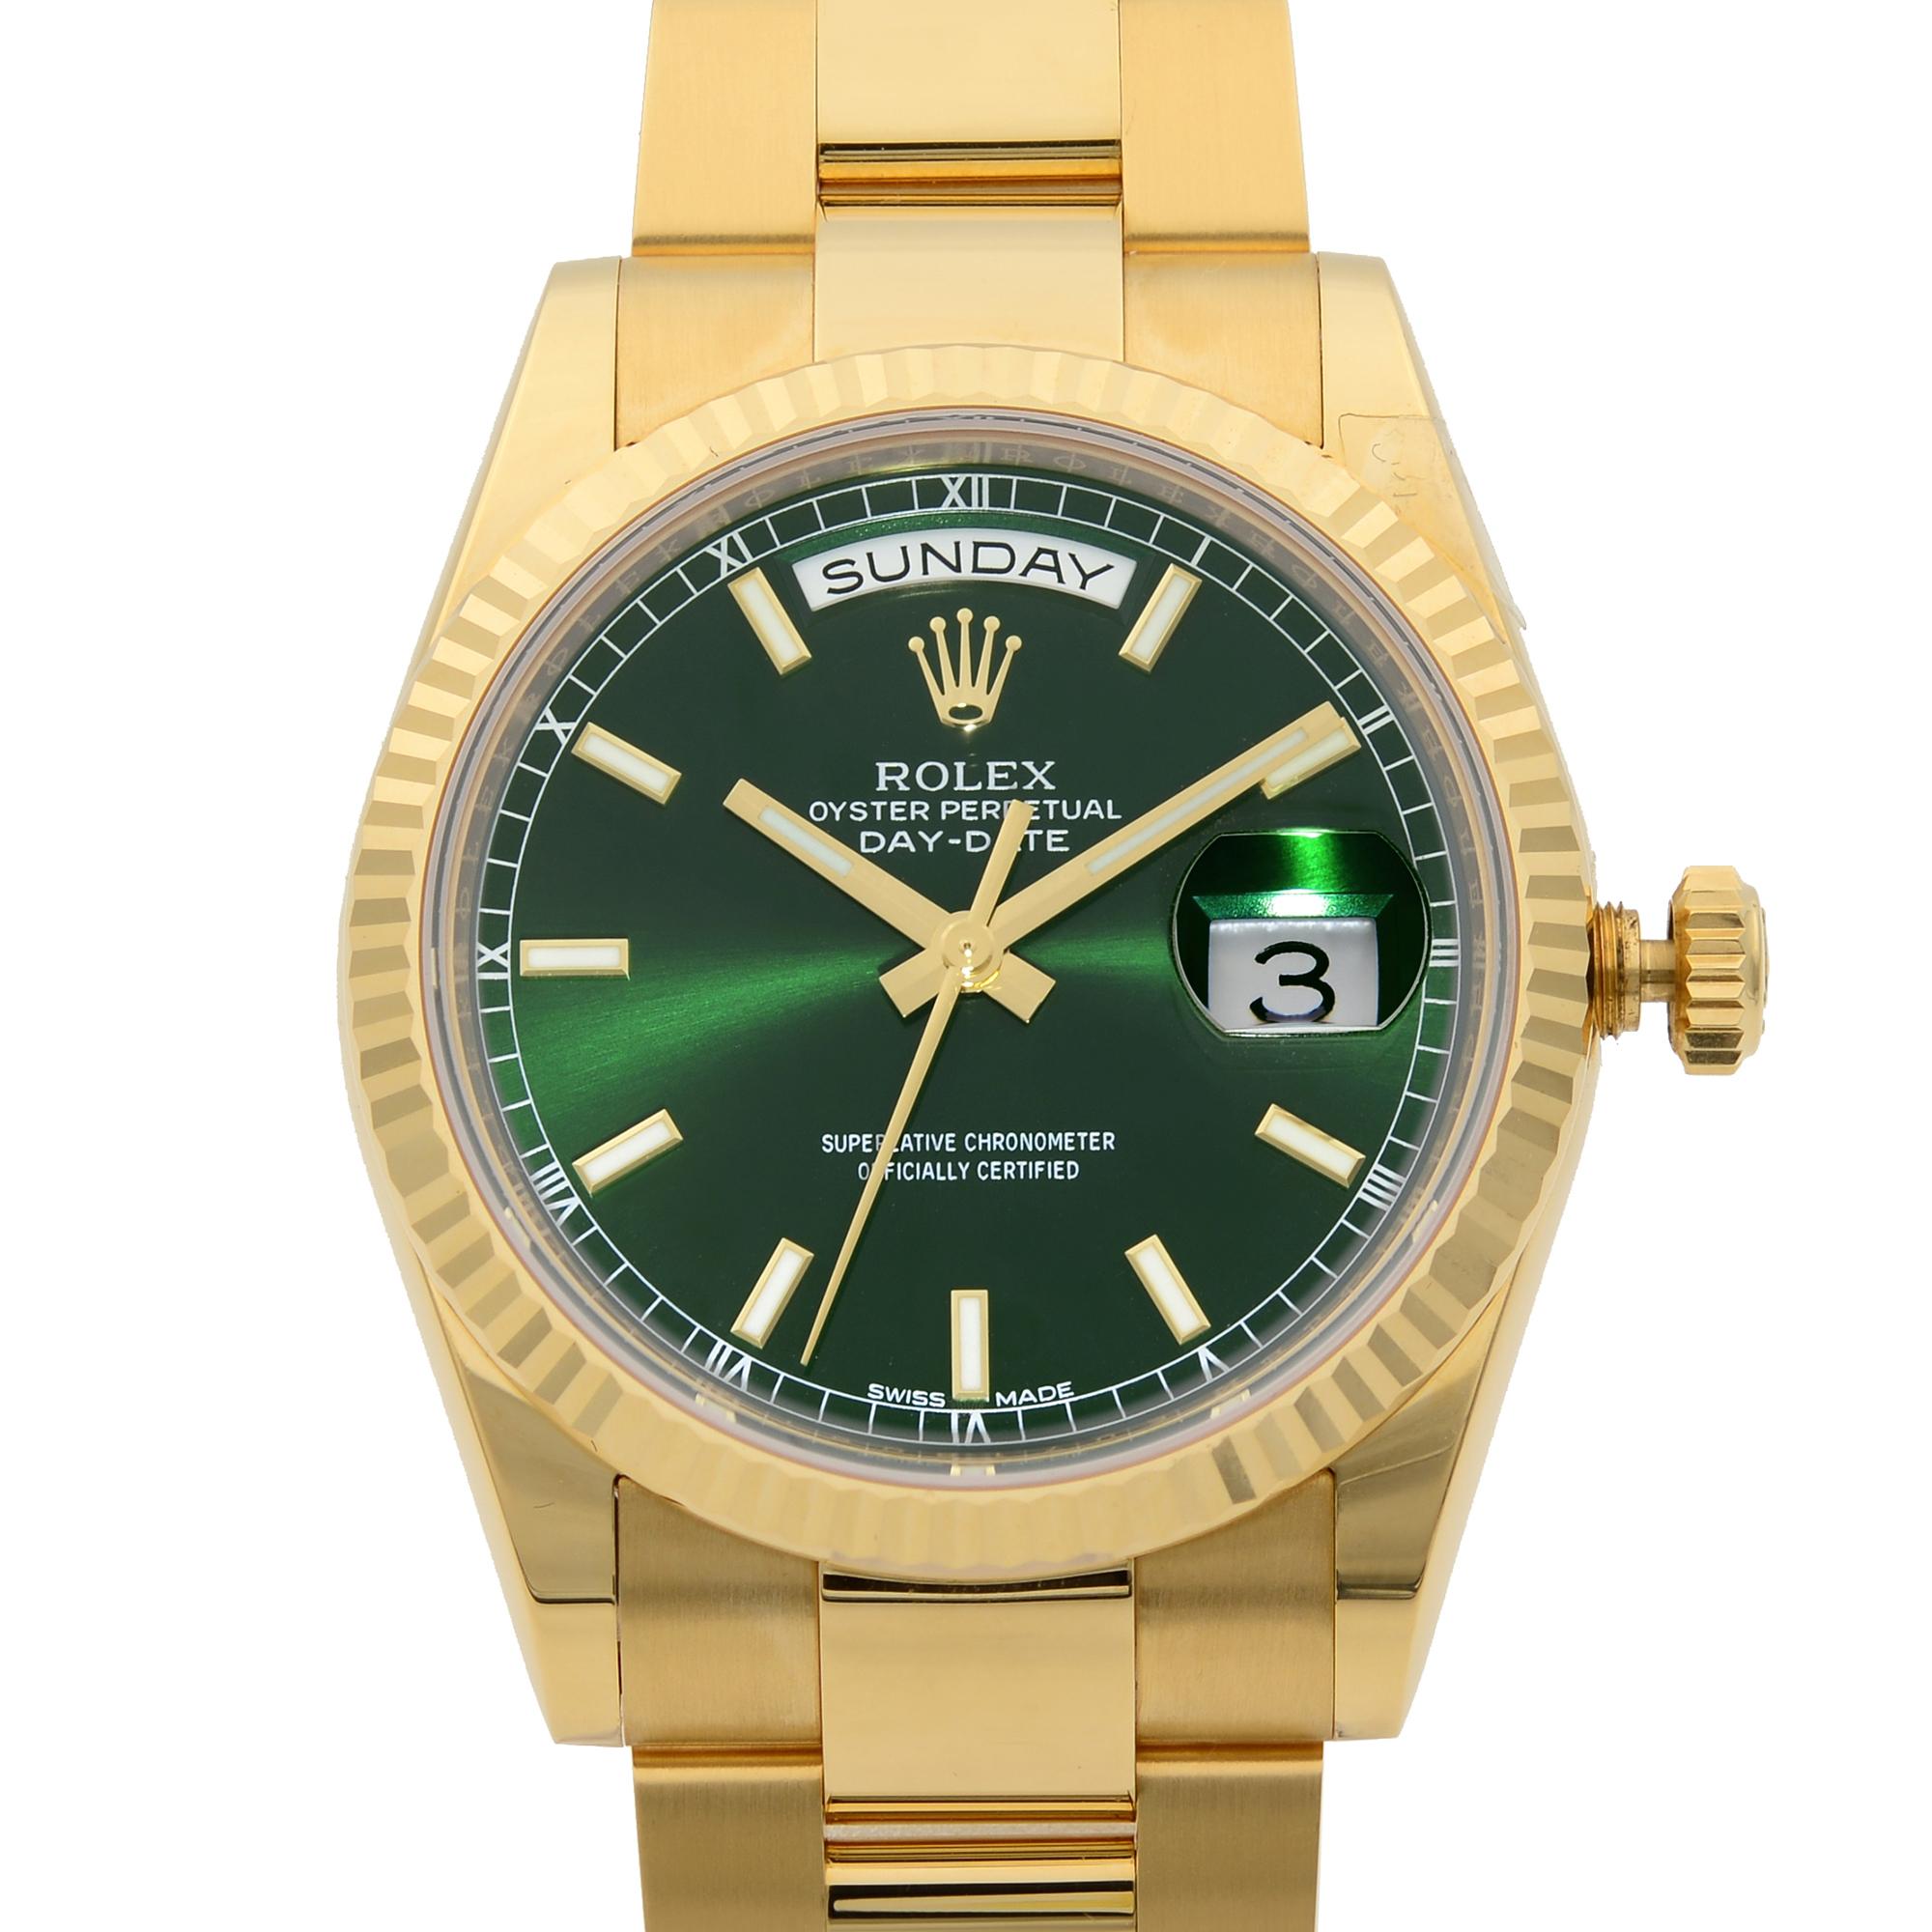 This pre-ownedLike New Rolex Day-Date 118238 is a beautiful men's timepiece that is powered by Japanese automatic movement which is cased in a yellow gold case. It has a round shape face, day & date dial, and has hand sticks style markers. It is